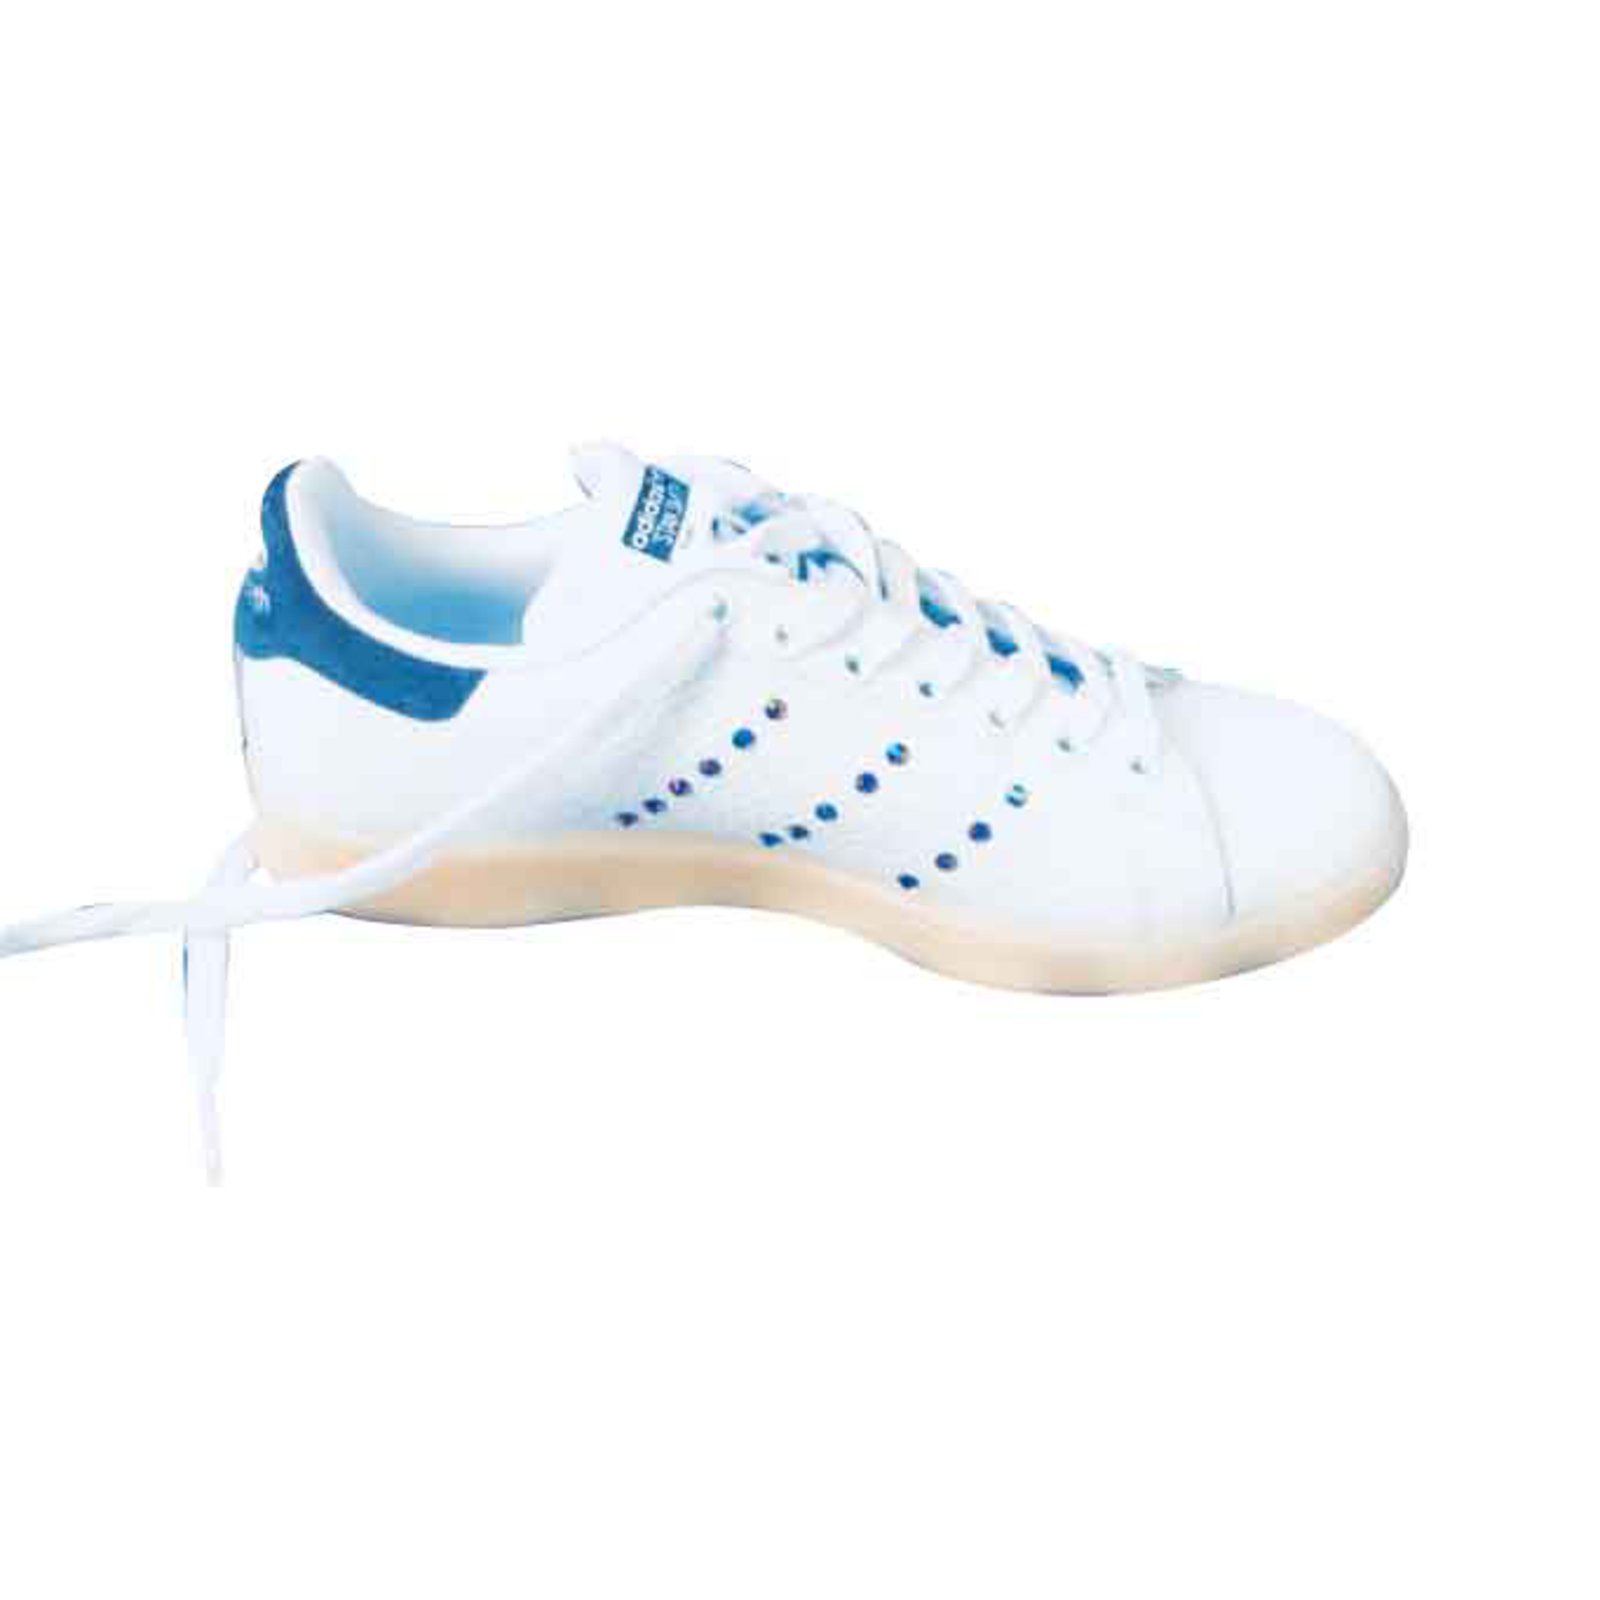 are adidas real leather